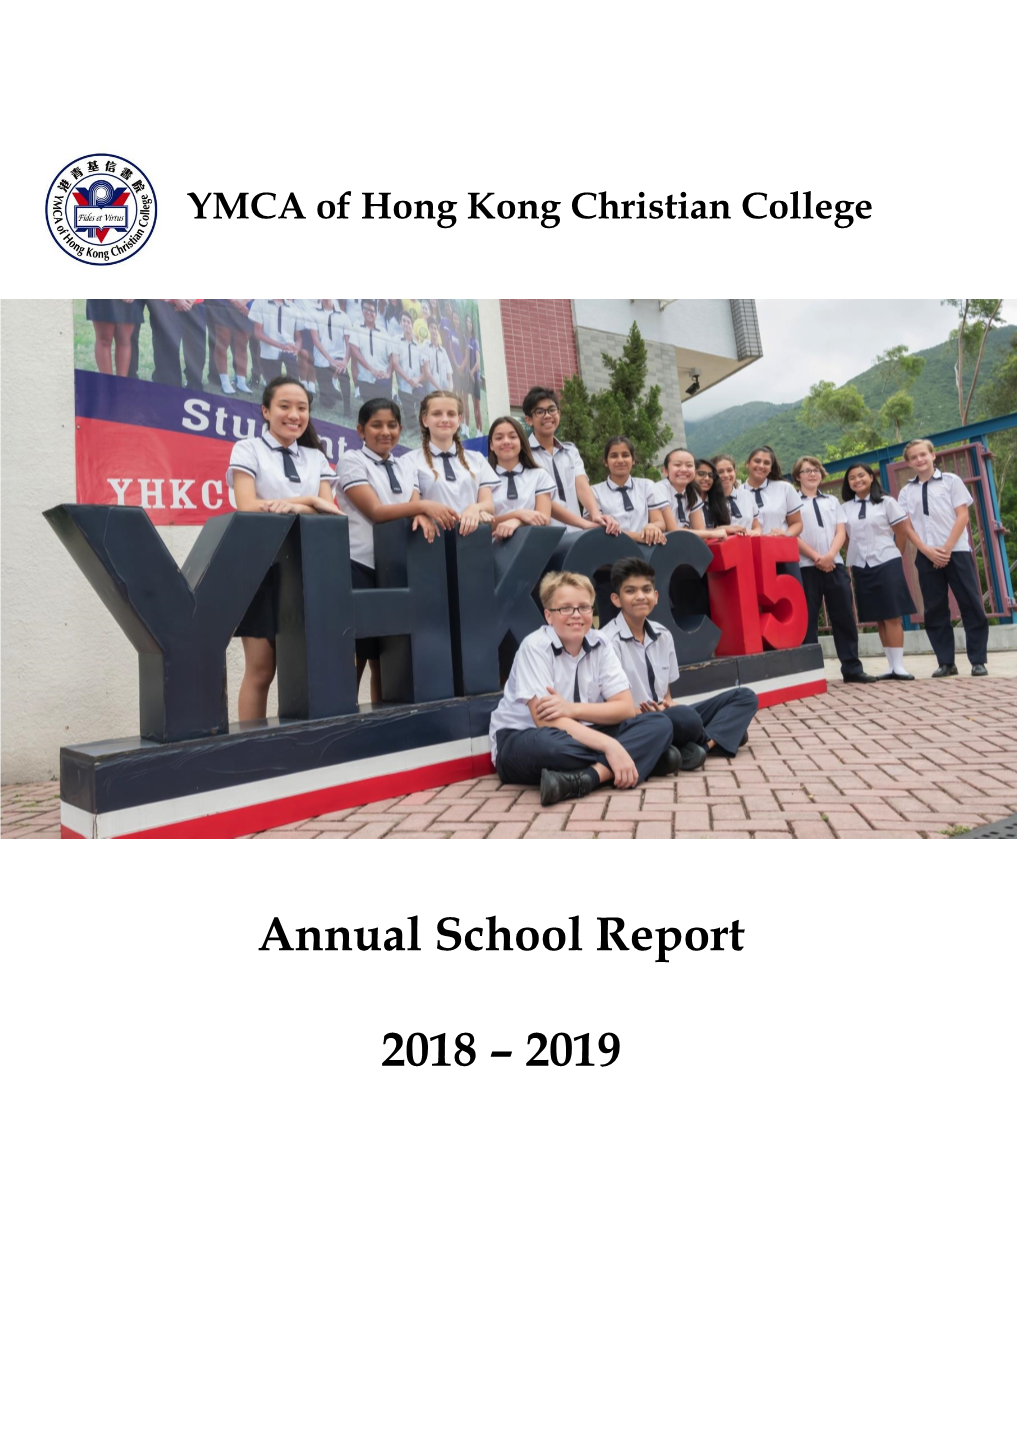 Annual School Report 2018 – 2019 Page 2